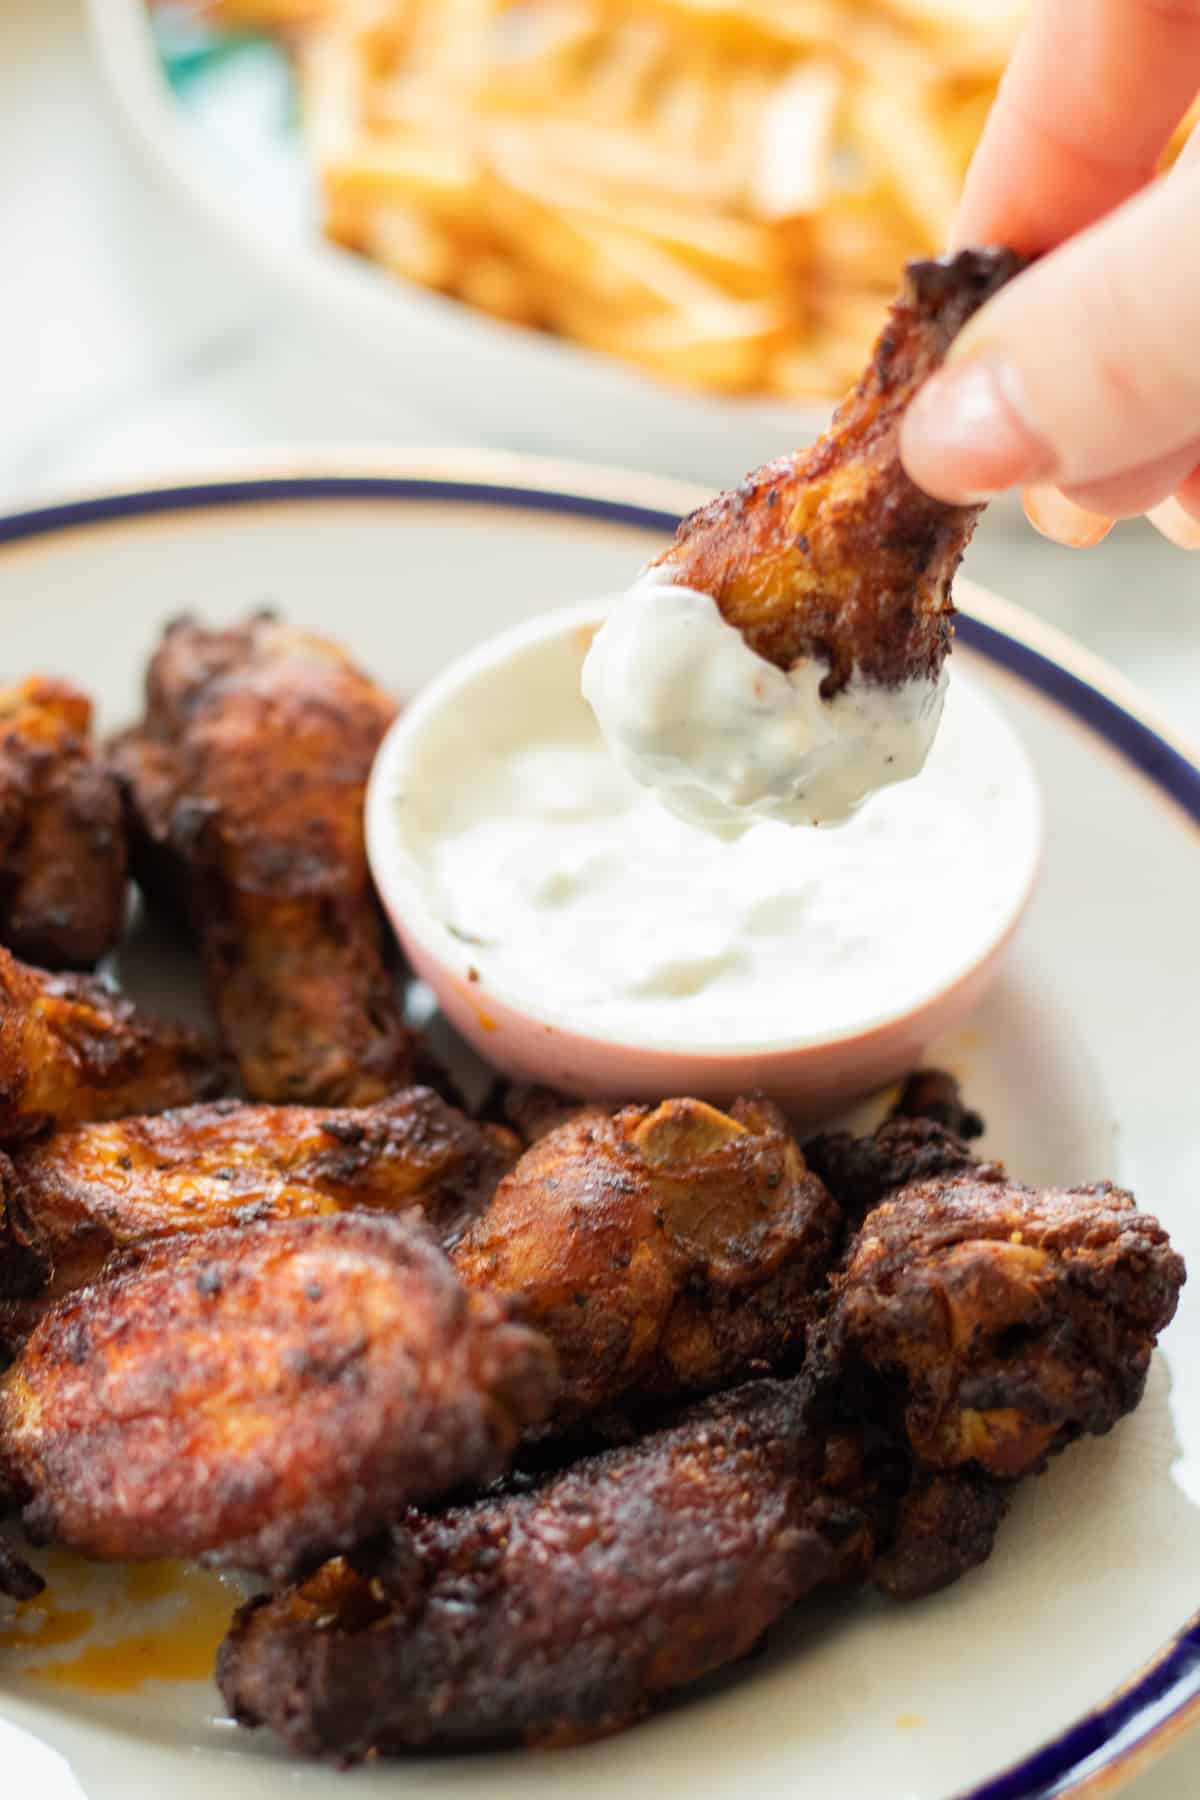 a chicken wing being dipped into blue cheese sauce.